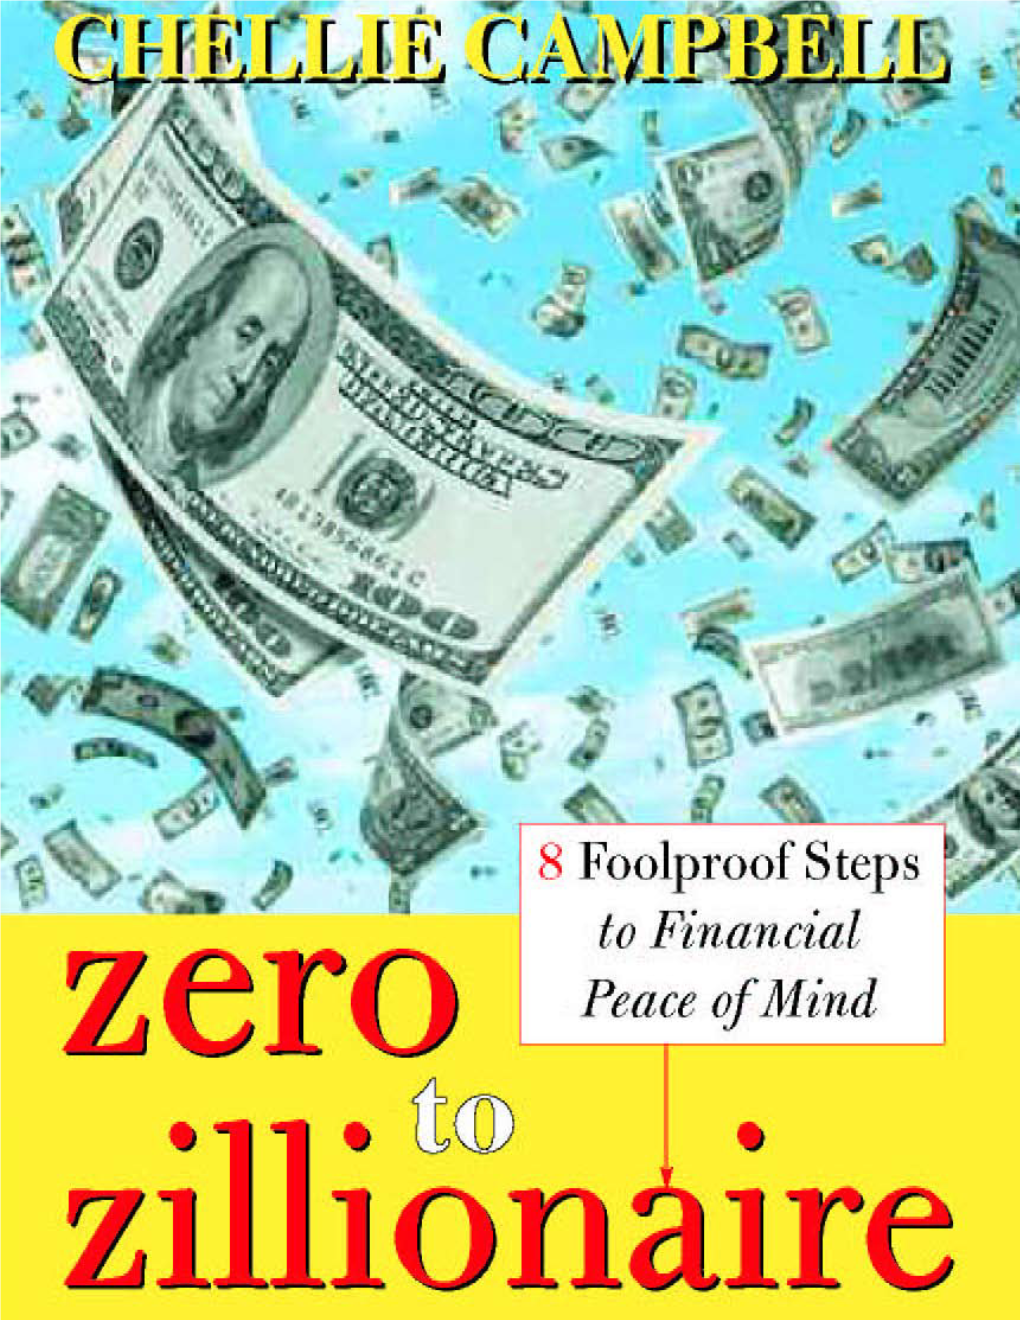 Zero to Zillionaire: 8 Foolproof Steps to Financial Peace of Mind” by Chellie Campbell